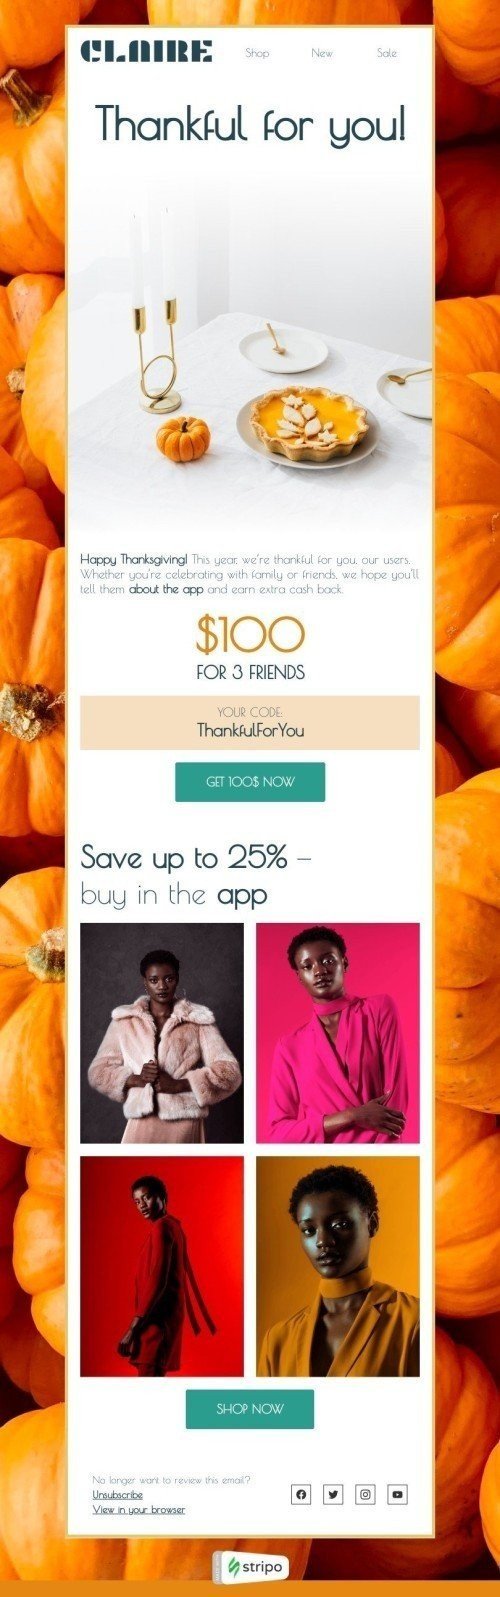 Thanksgiving Day Email Template «Thankful for you!» for Fashion industry desktop view